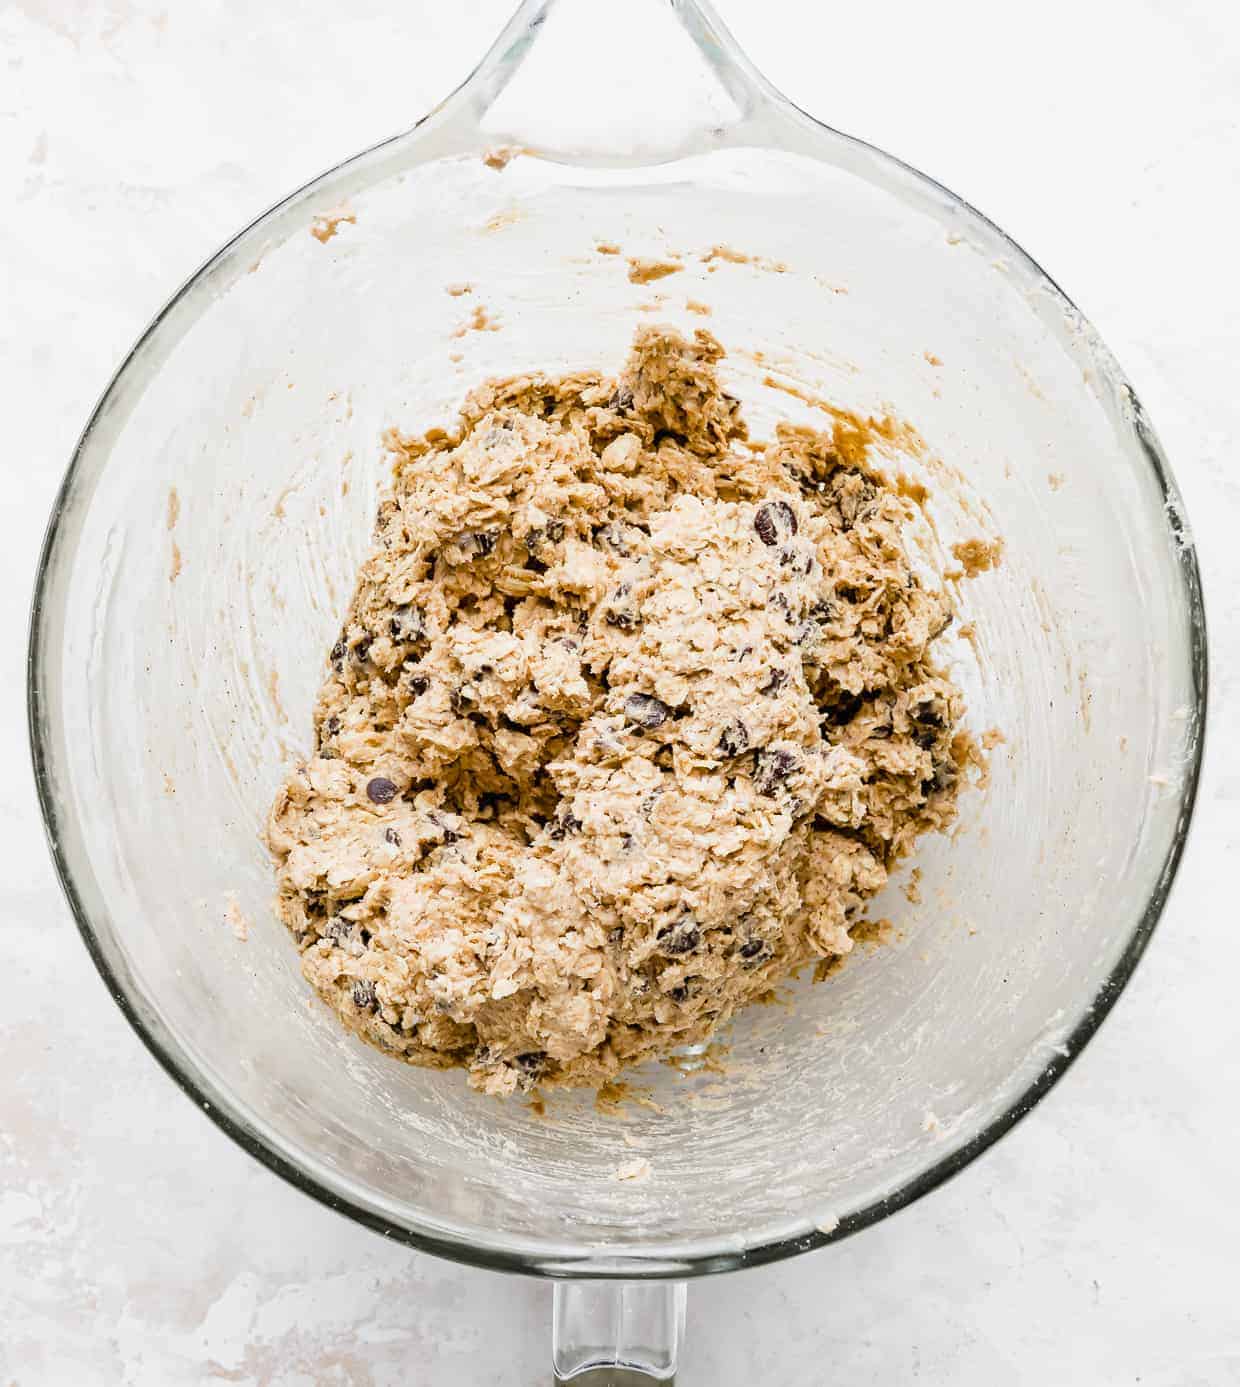 Oatmeal Chocolate Chip Cookie dough in a glass bowl against a white background.